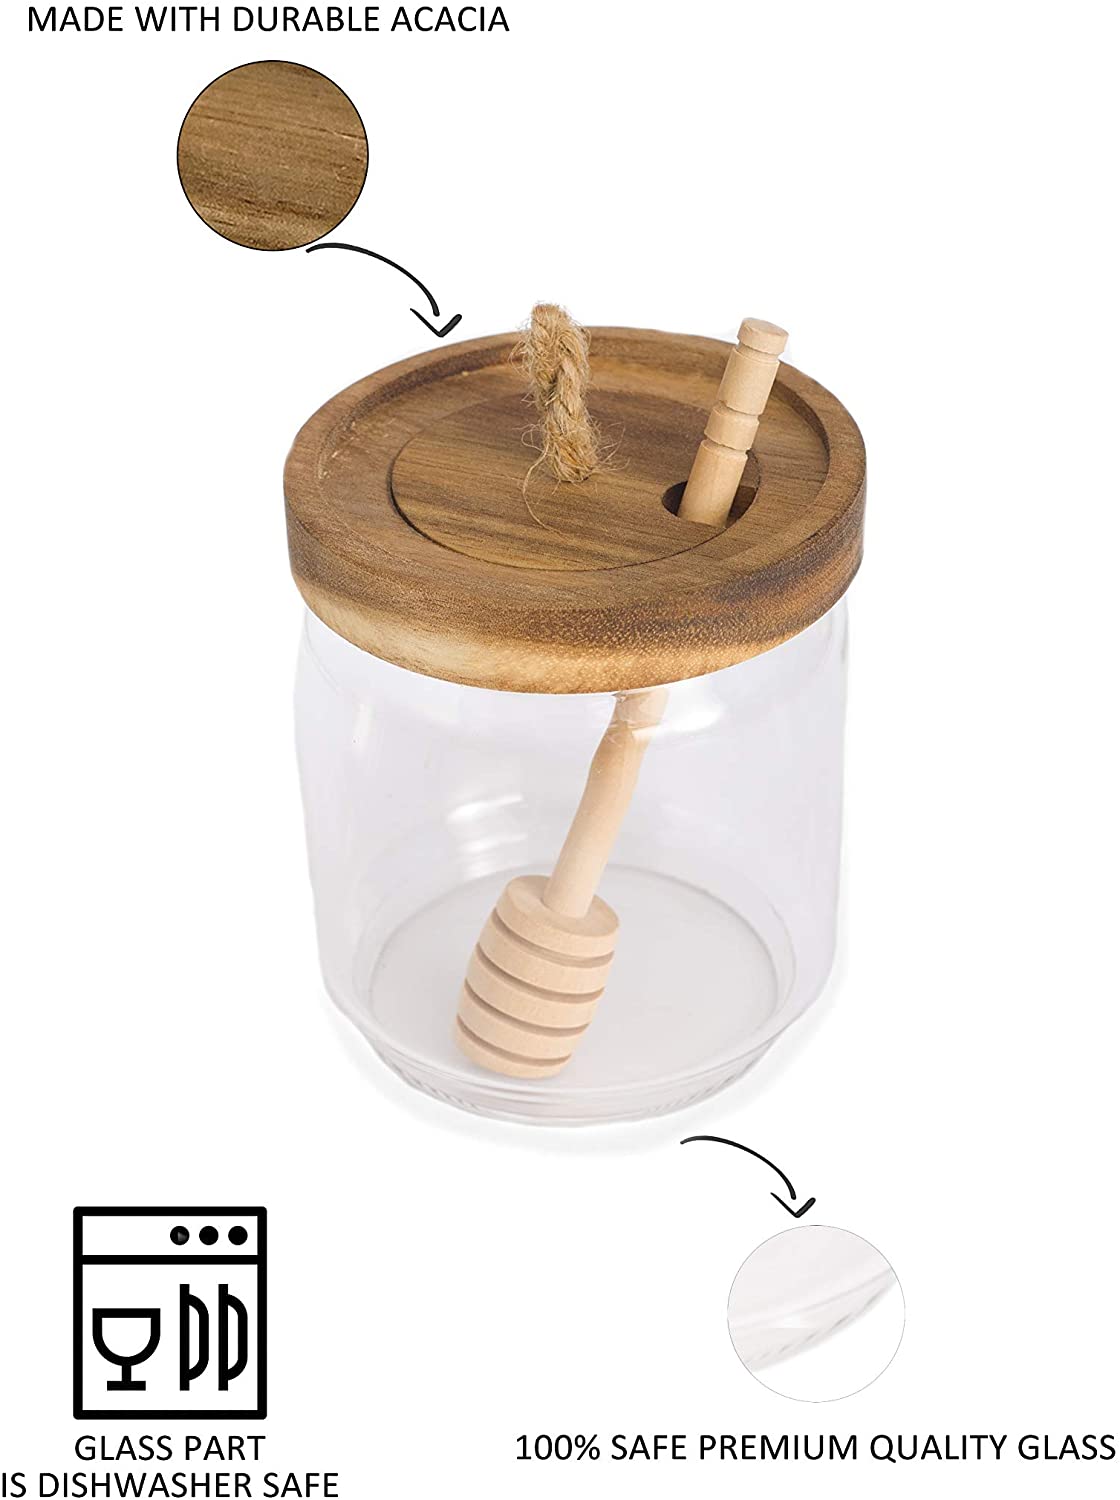 Honey Jar Pot Glass Holder Dispenser Set with Wooden Dipper Stick and Acacia Lid Cover for Home Kitchen